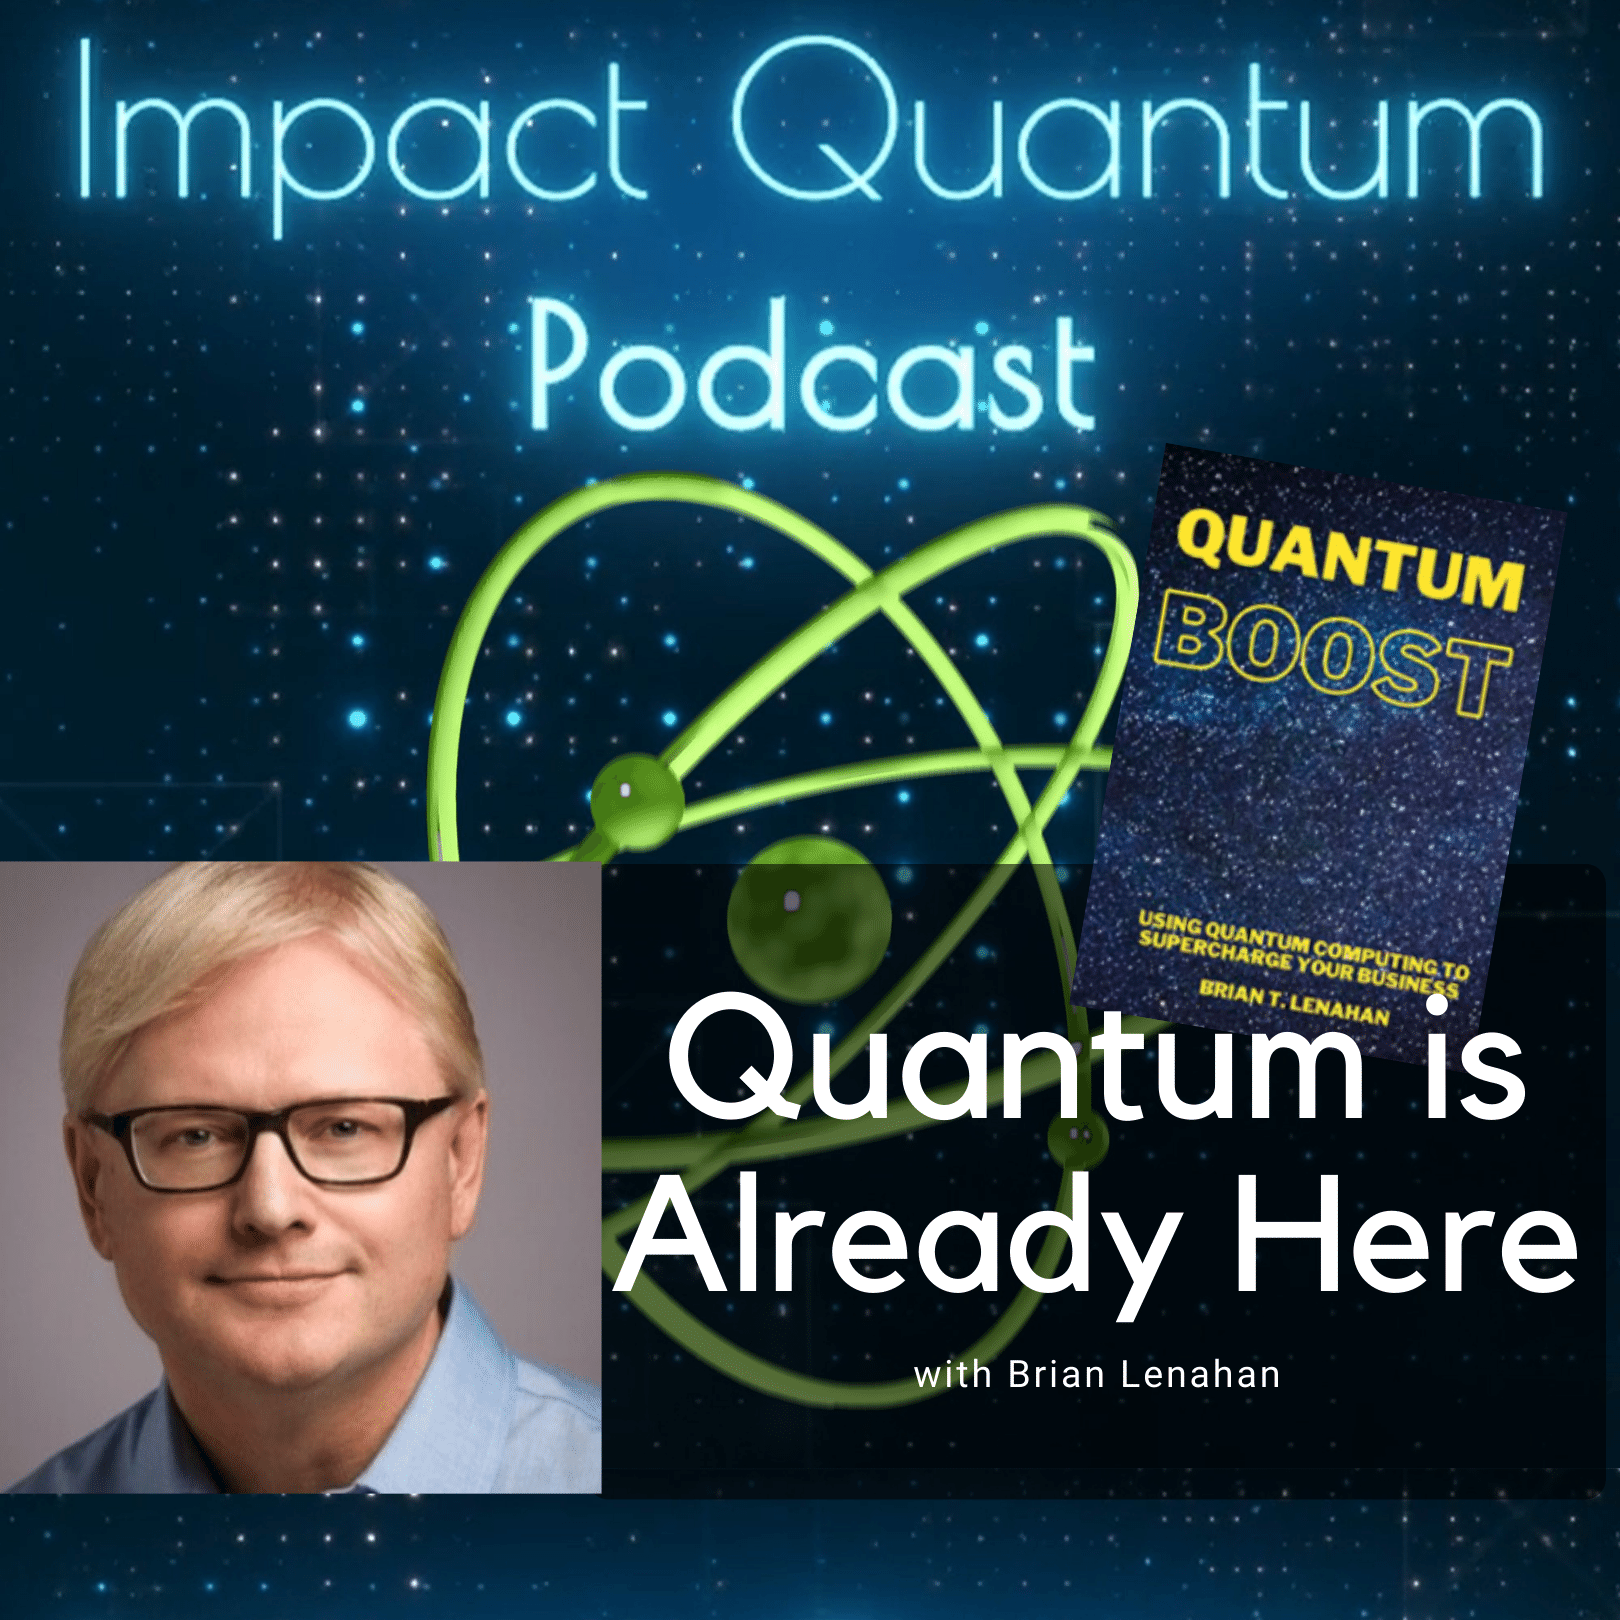 Artwork for podcast Impact Quantum: A Podcast for Engineers